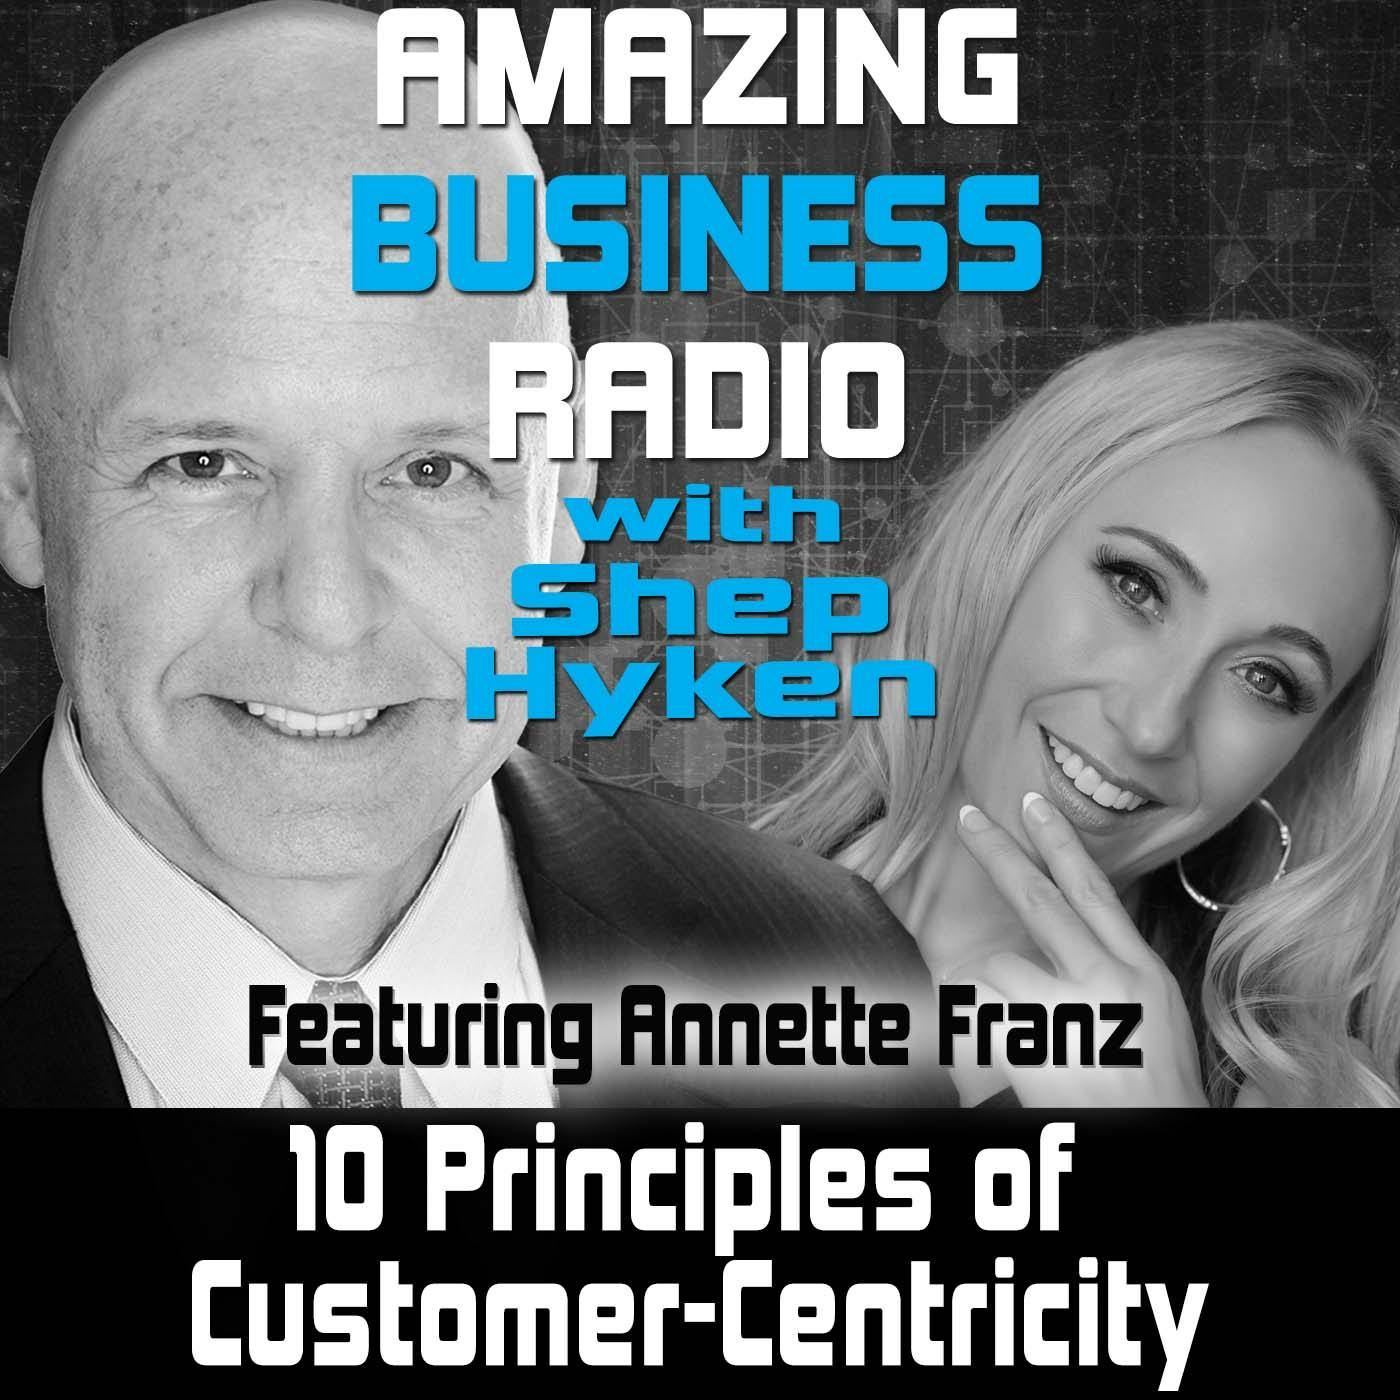 10 Principles of Customer-Centricity Featuring Annette Franz